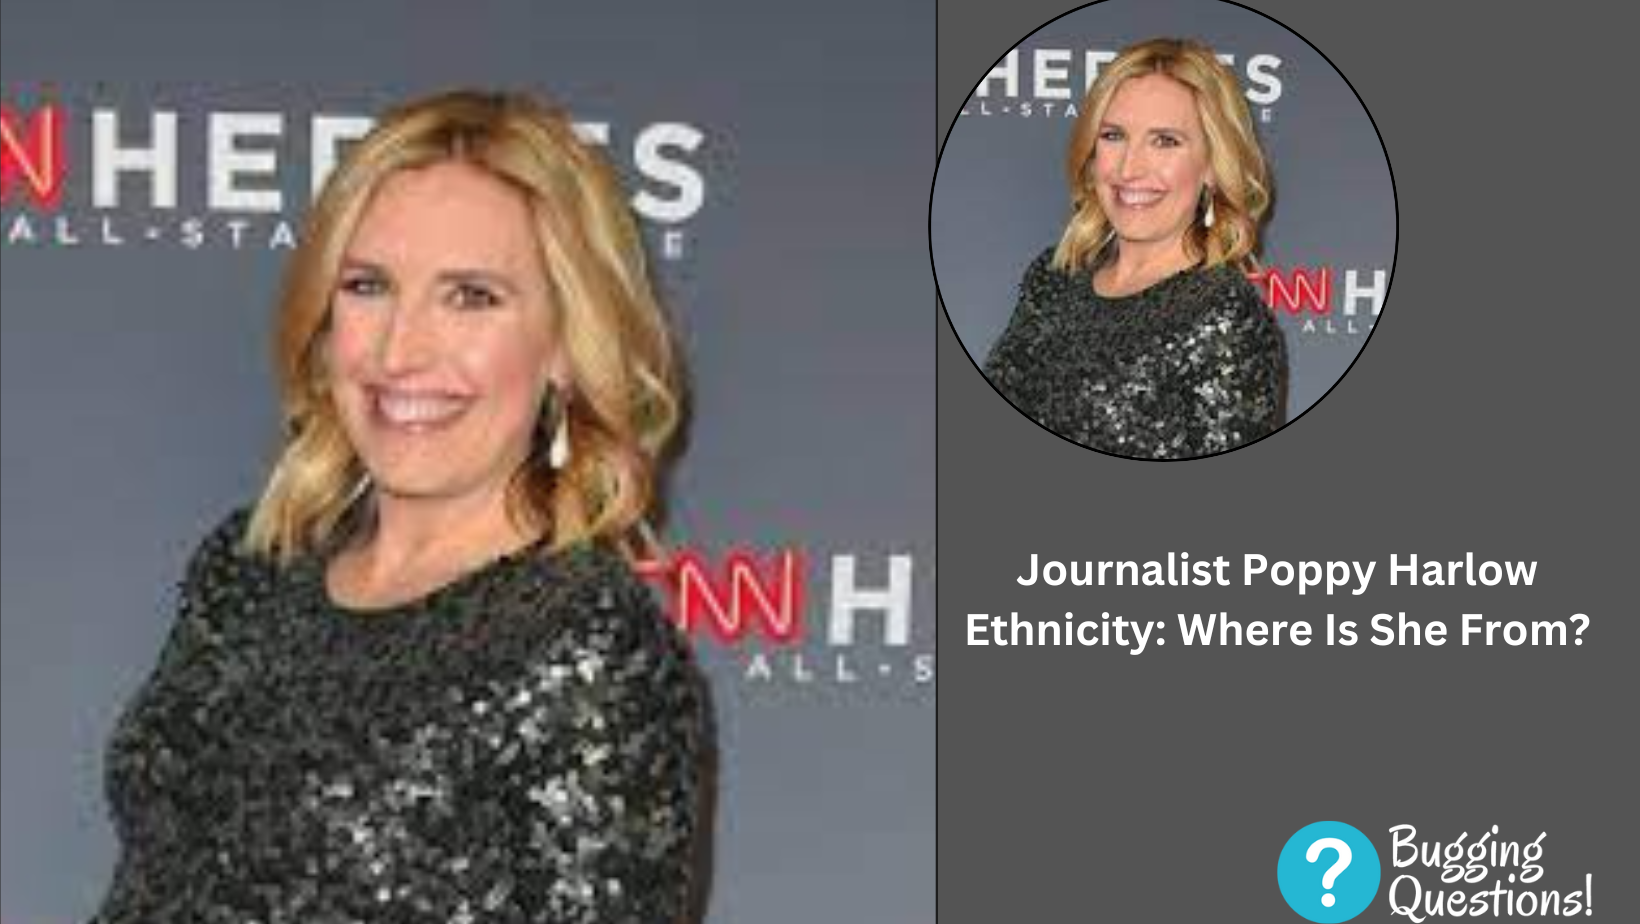 Journalist Poppy Harlow Ethnicity: Where Is She From?